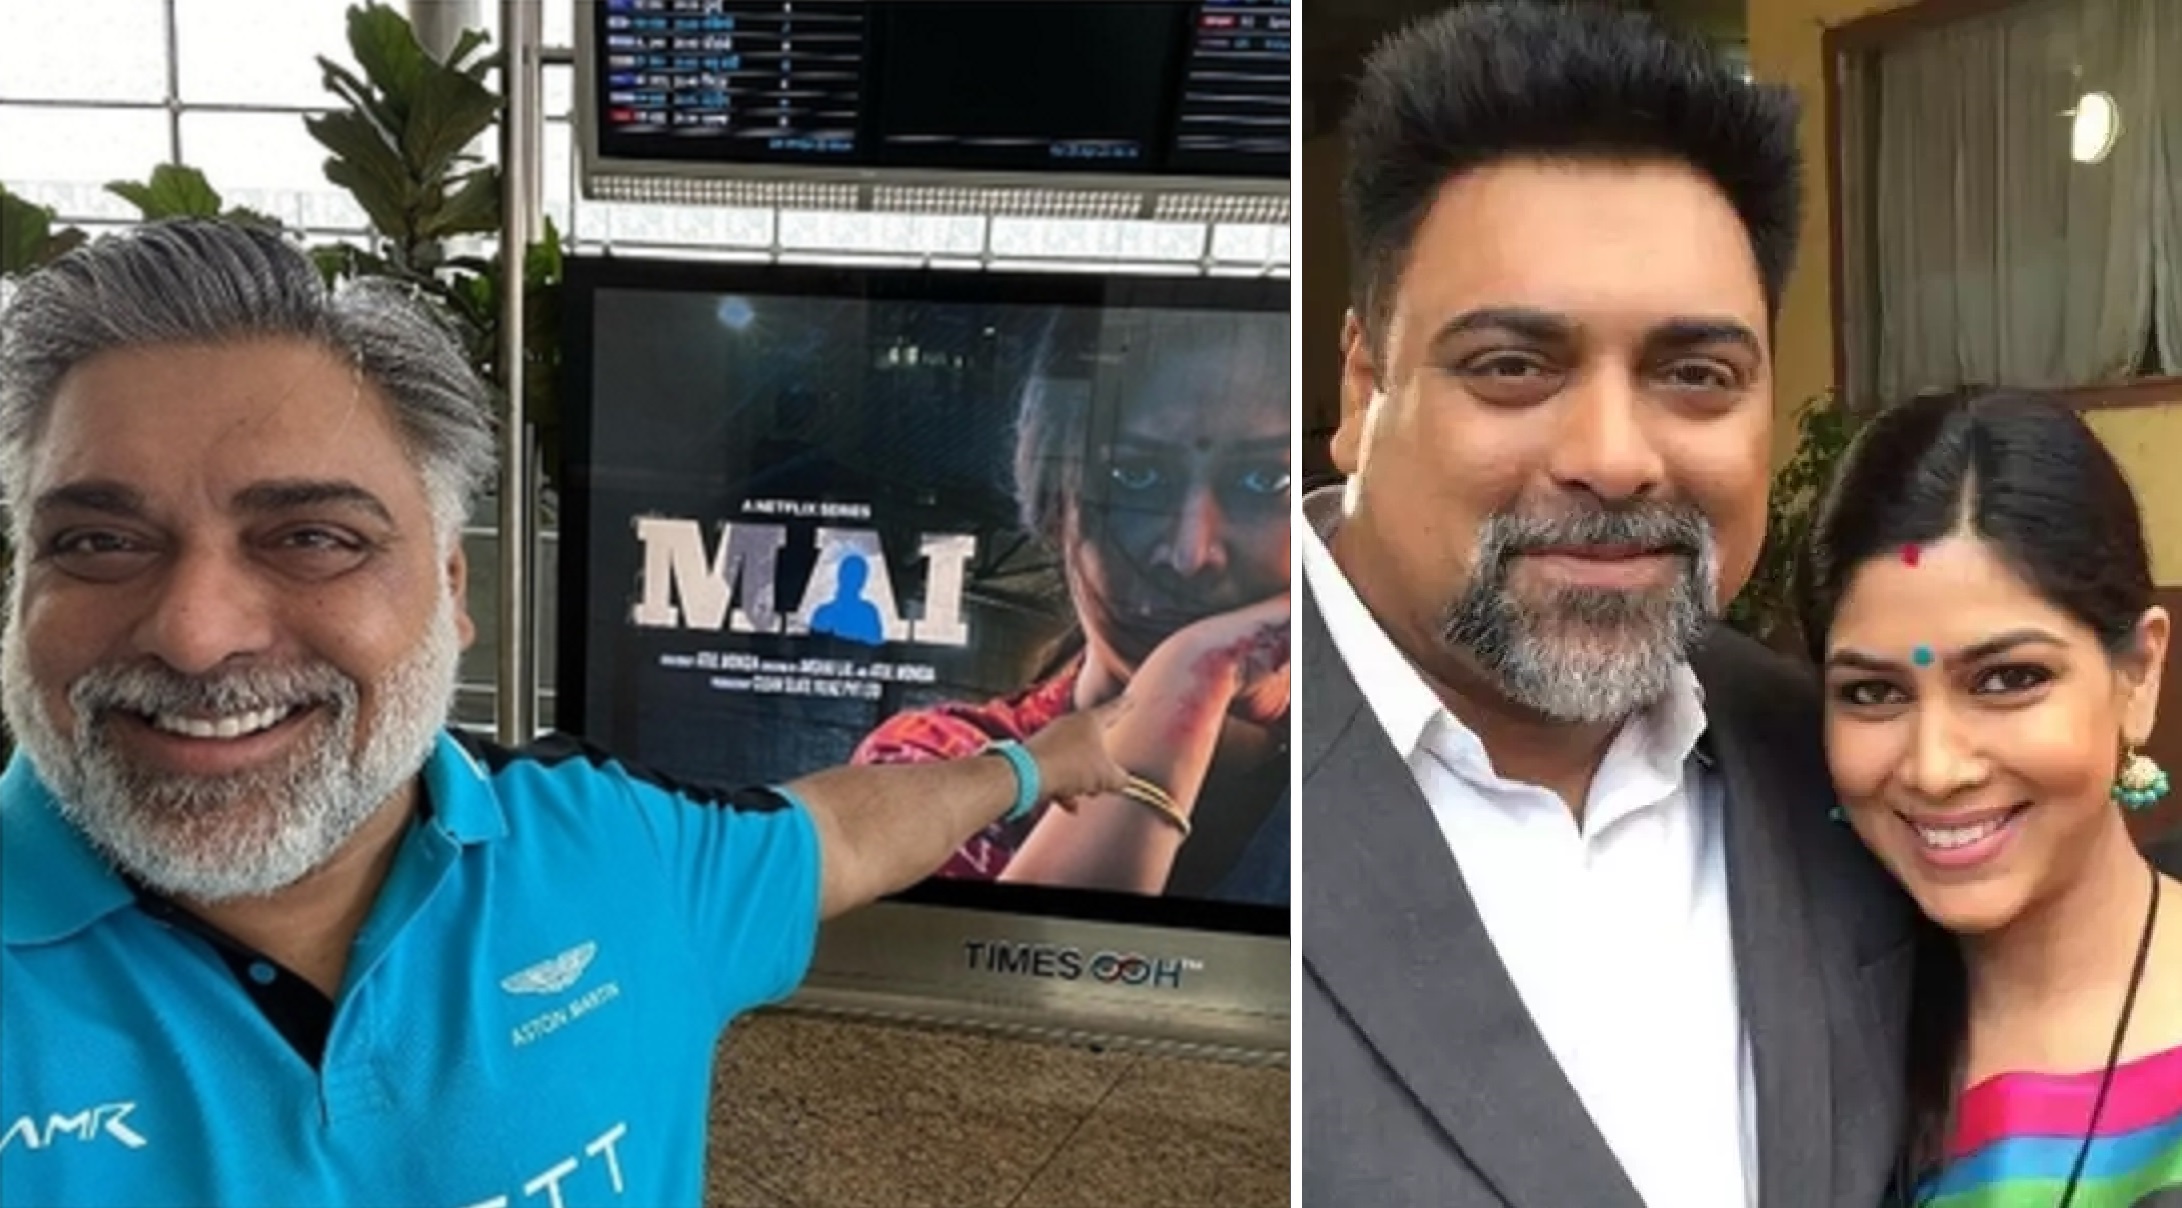 Ram Kapoor Becomes Happy Seeing His Former Co-star Sakshi Tanwar’s Poster In Aiport For ‘Mai’: ‘I know you’re going to rock it’